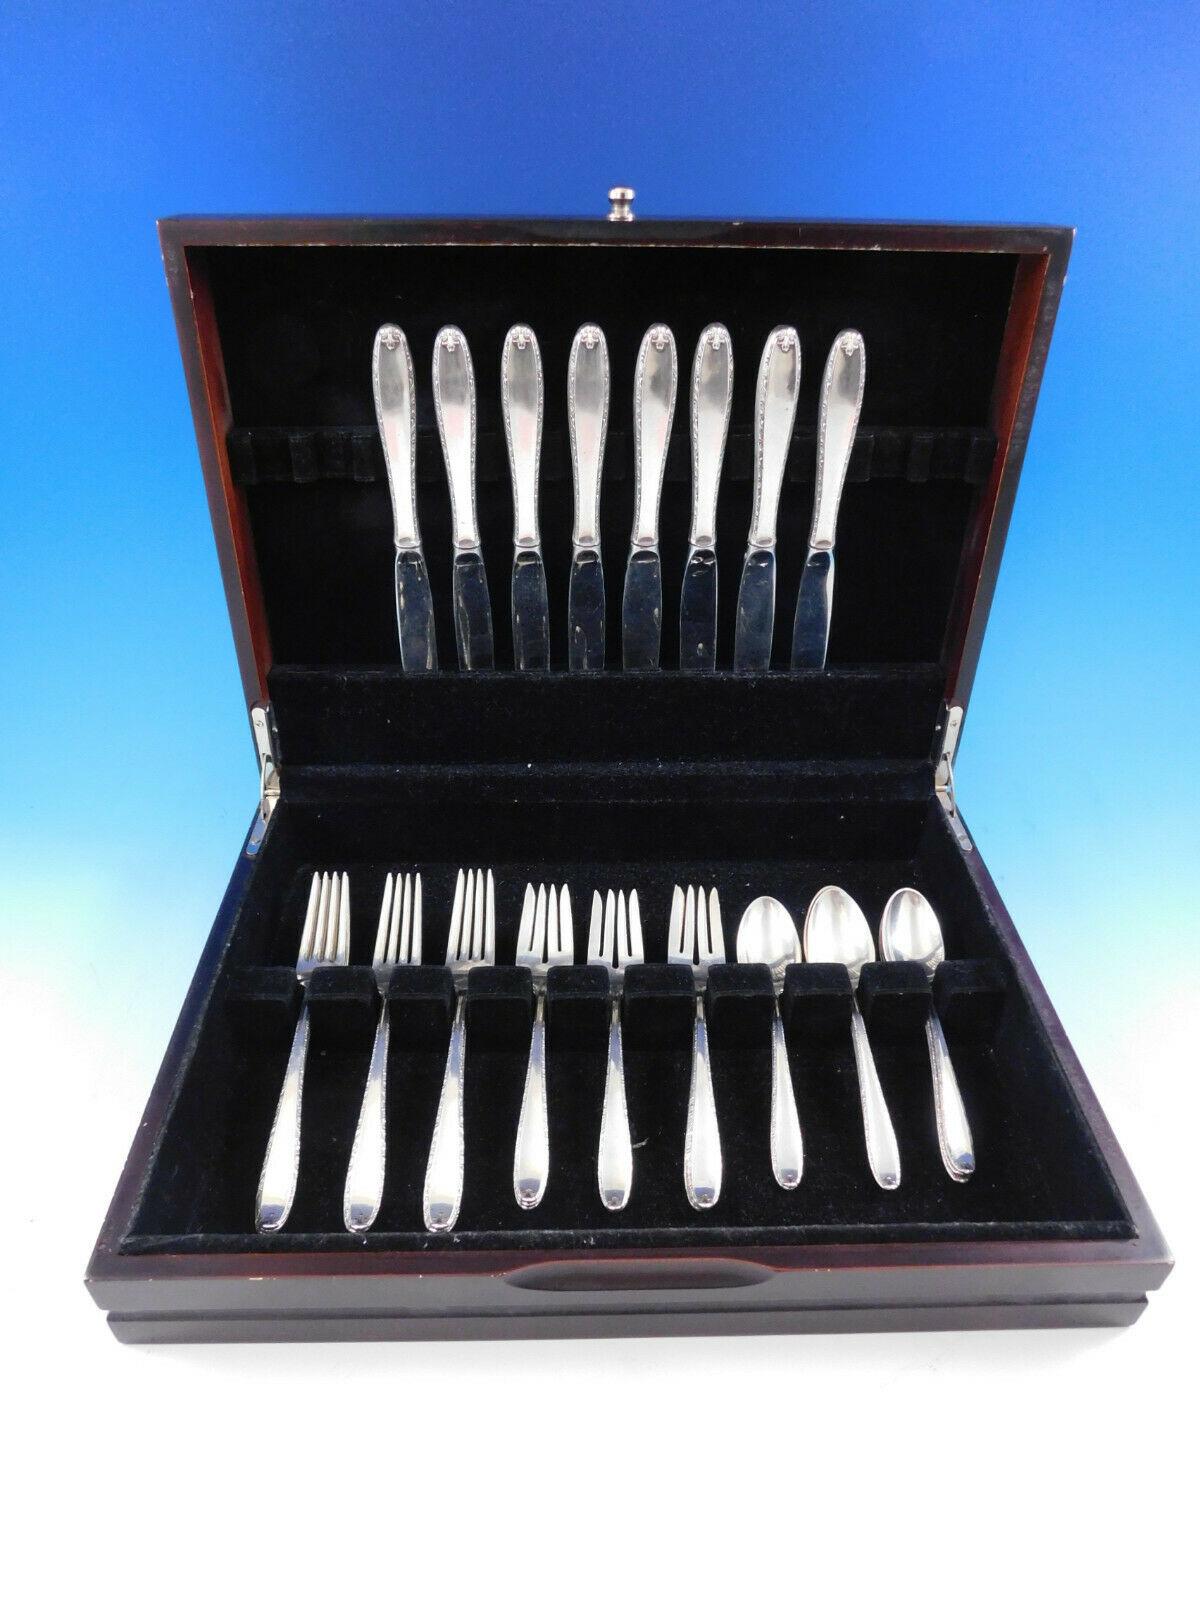 Southern Charm by Alvin sterling silver flatware set, 32 pieces. This set includes:

8 knives, 8 7/8